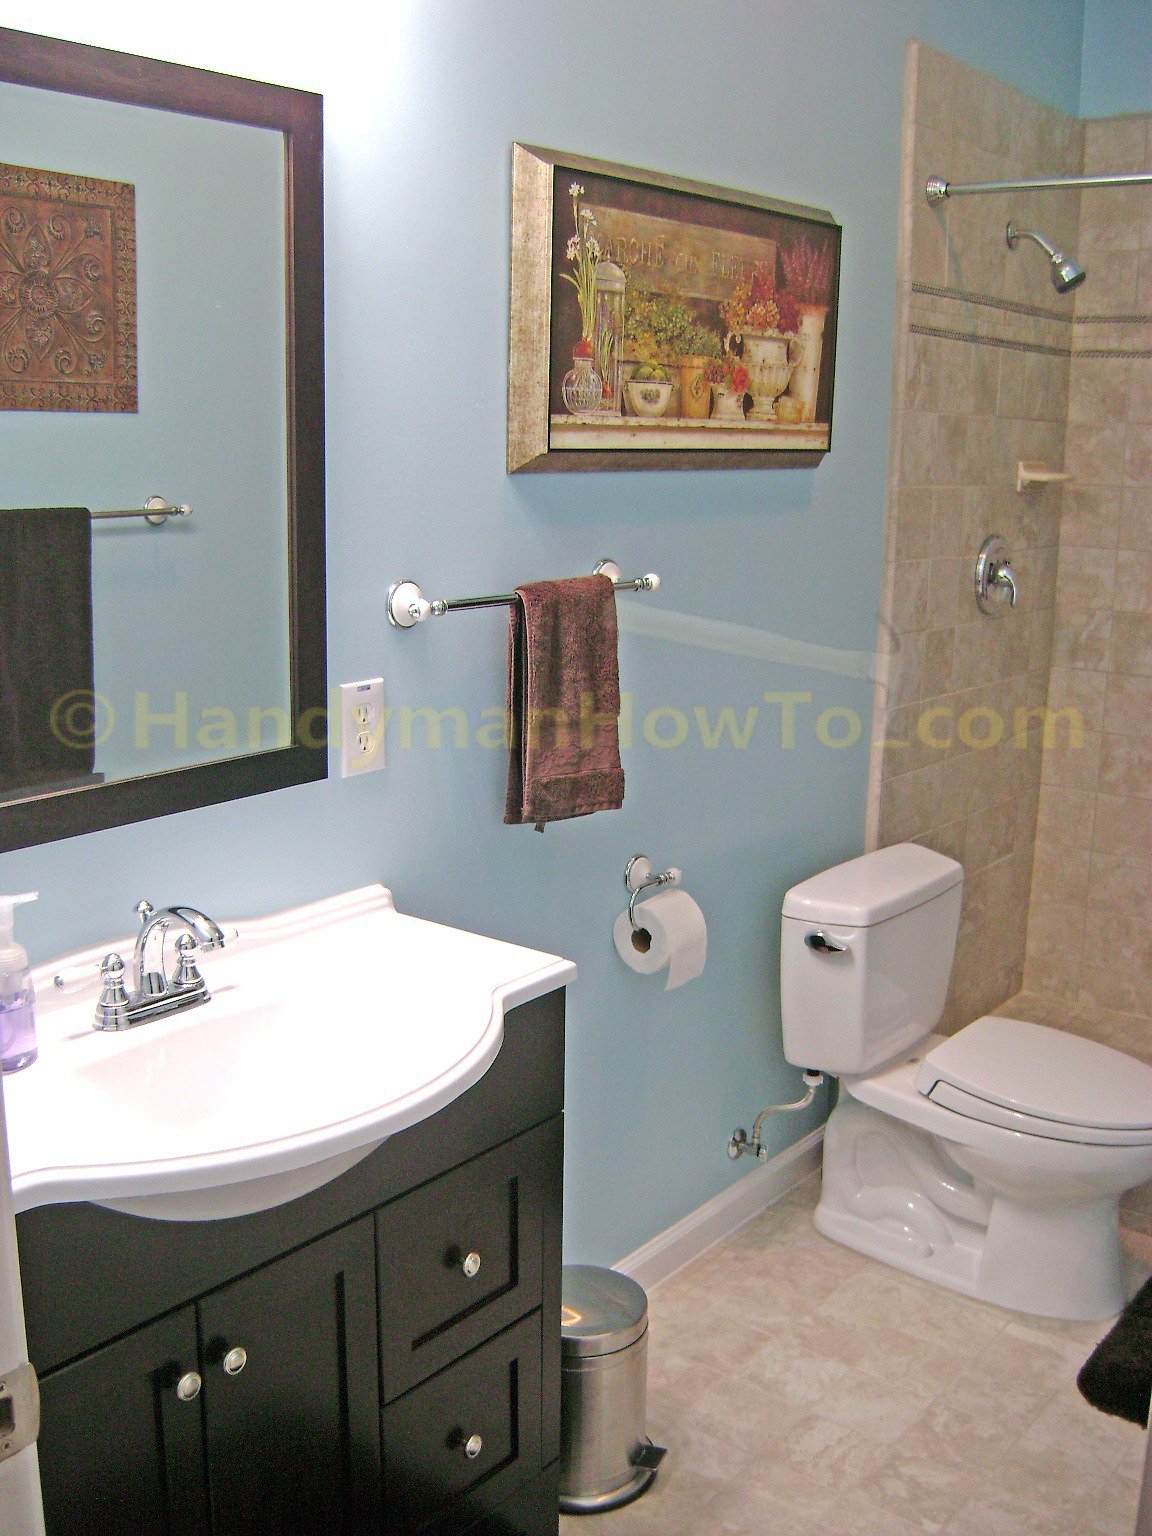 How To Finish A Basement Bathroom The Complete Series